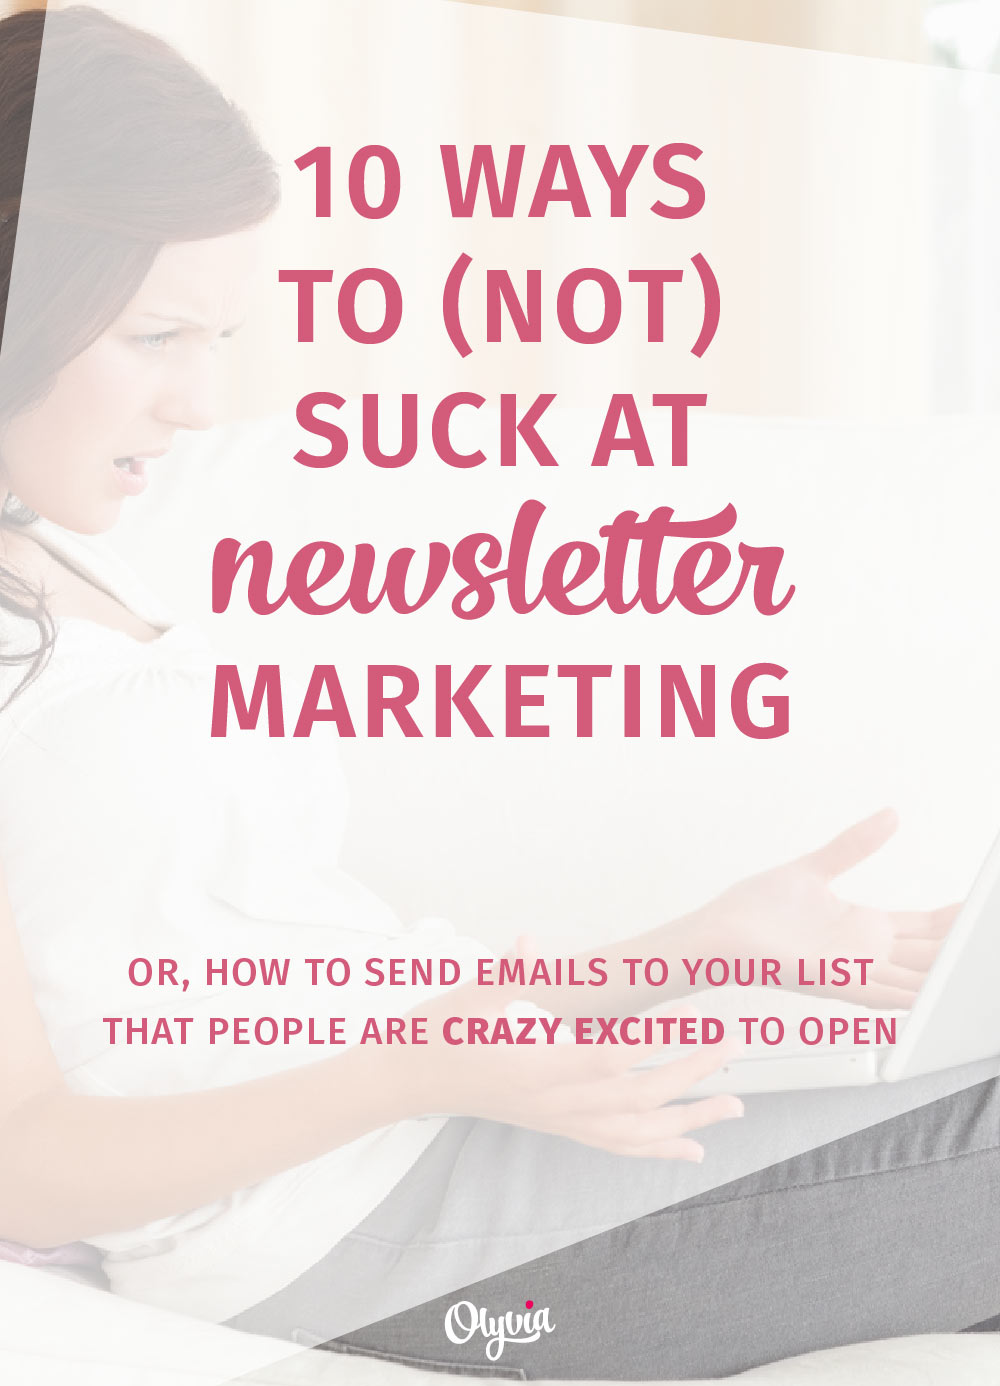 How (NOT) to suck at email marketing: learn how to build your email list and send amazing newsletters that your subscribers LOVE to open.